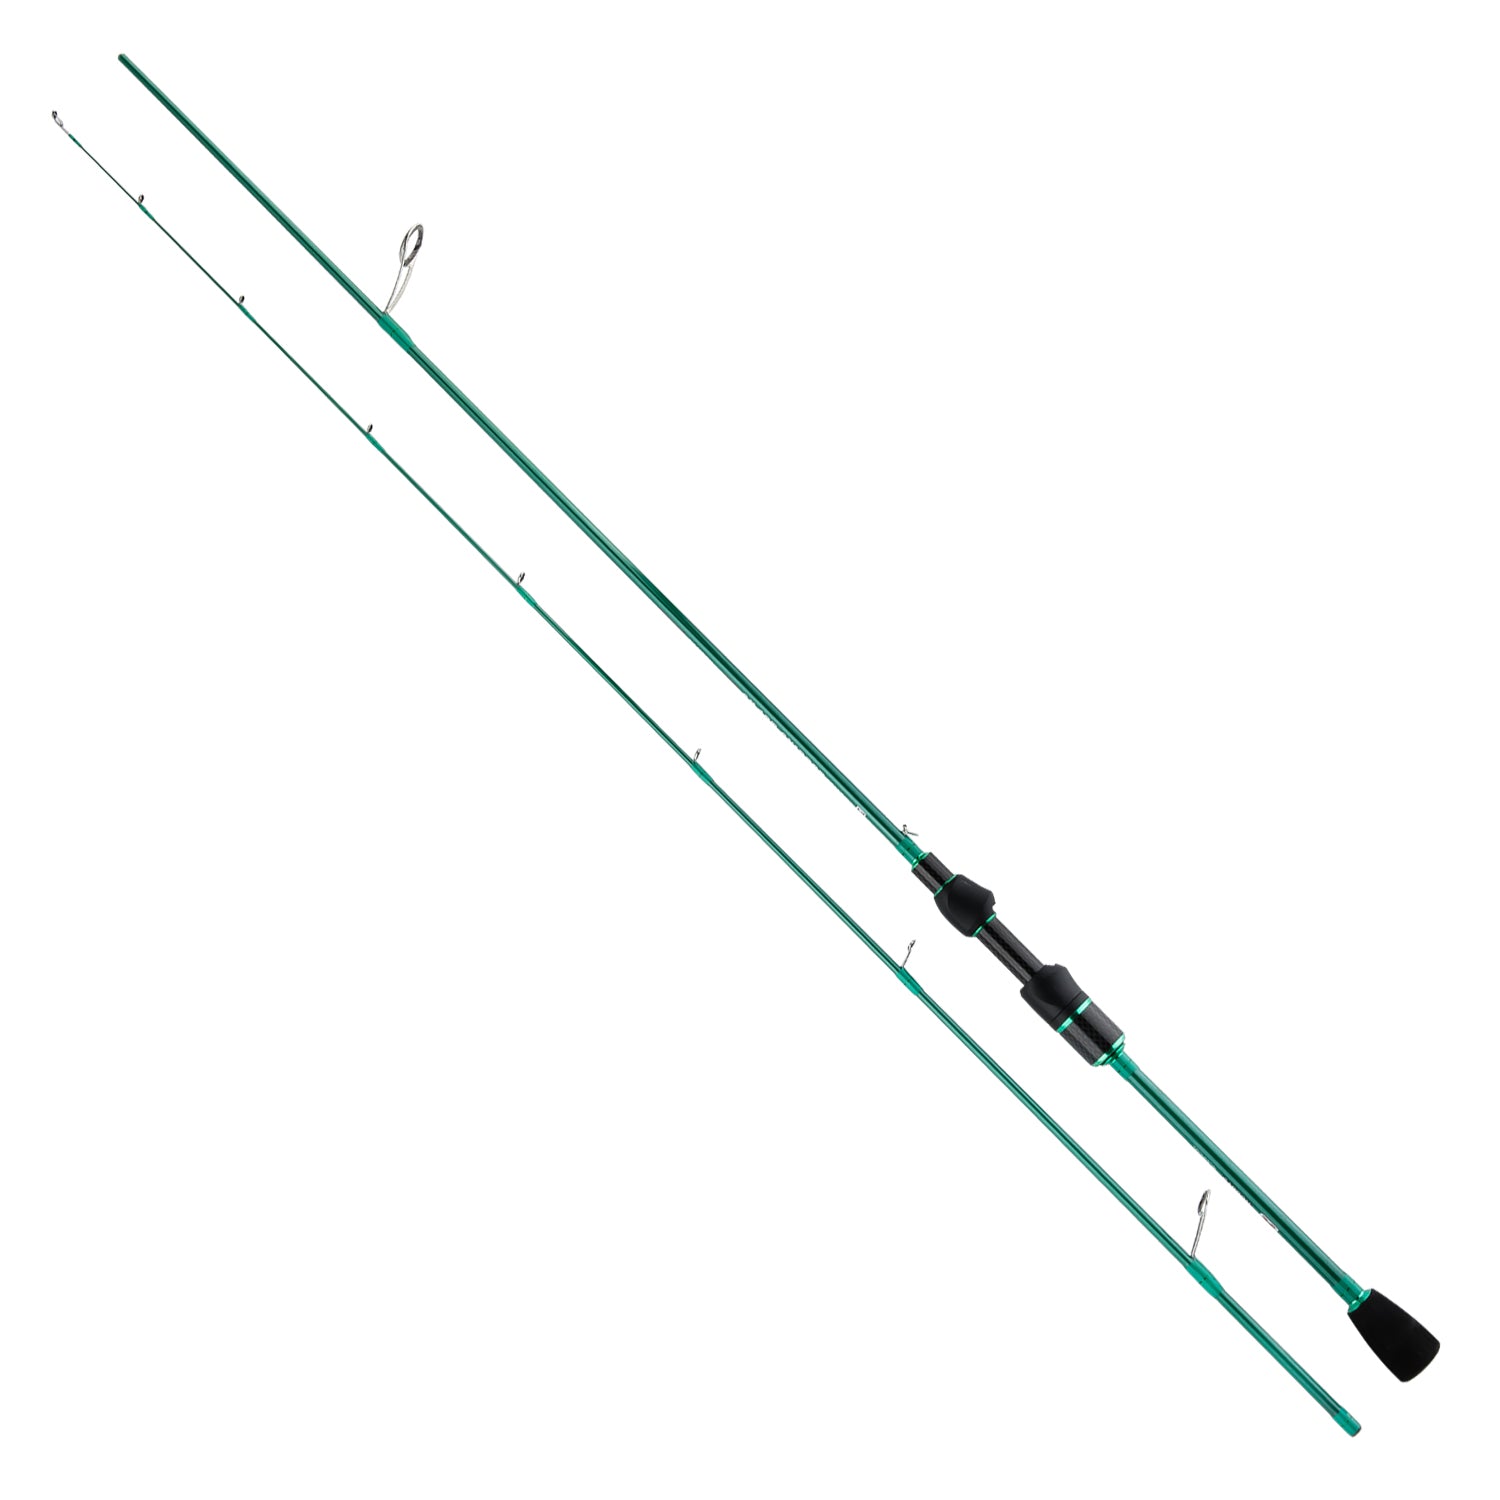 BERRYPRO Ultralight Spinning Fishing Rod, Travel Spinning Rod with